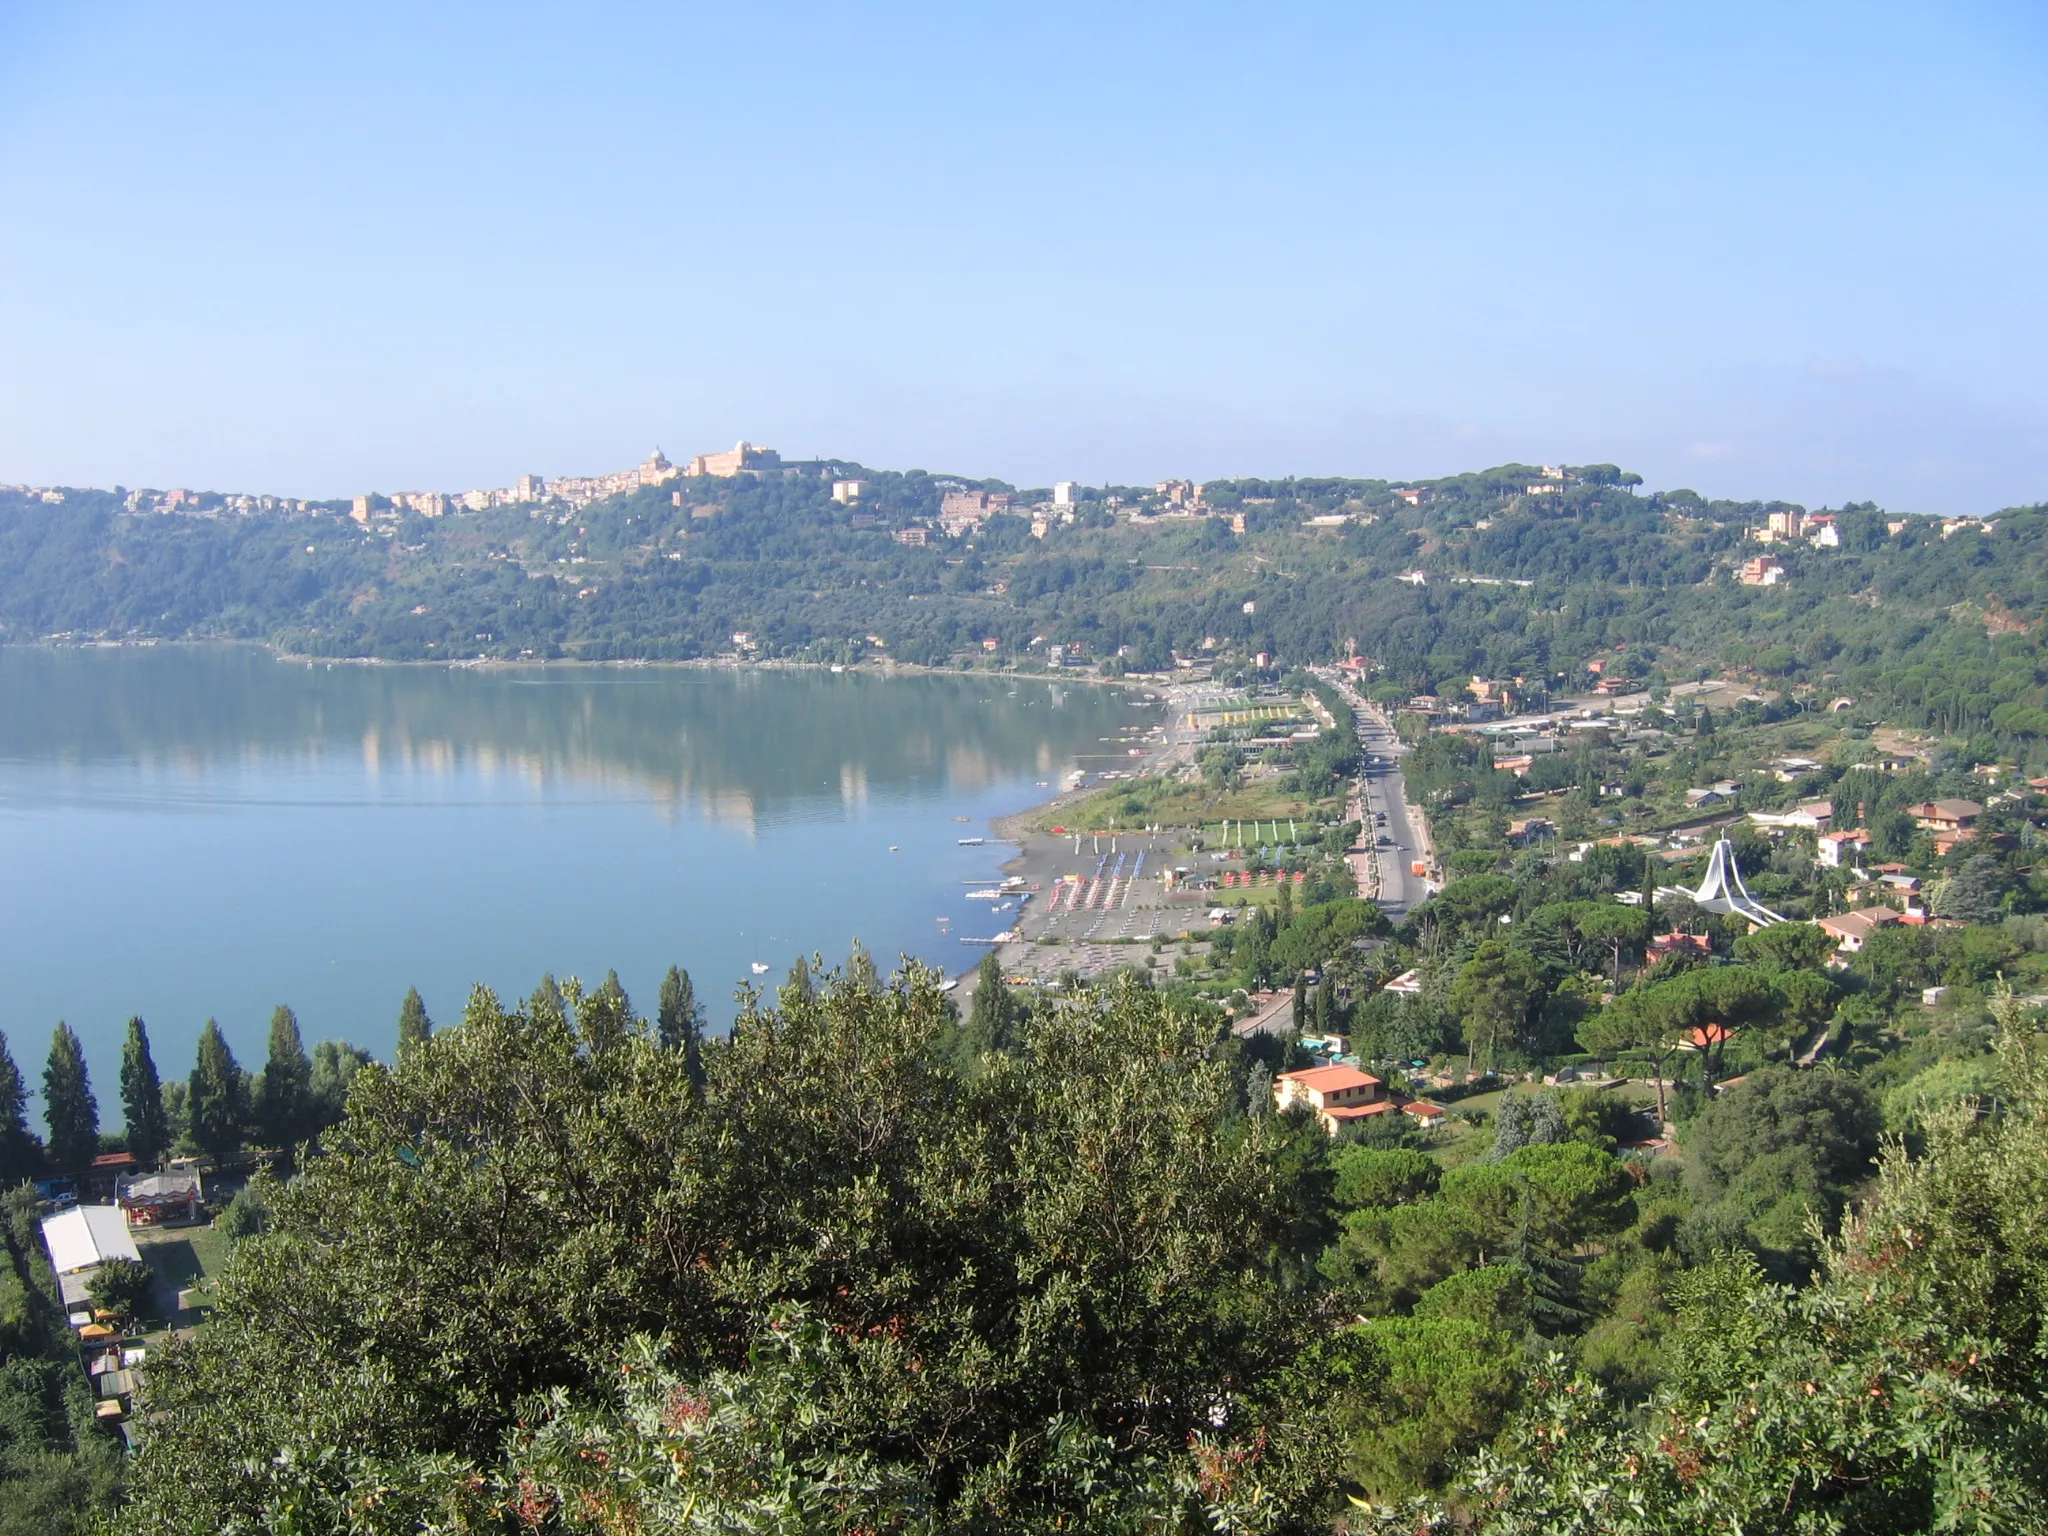 Photo showing: Municipality of Castel Gandolfo and the lake Albano, in Italy.